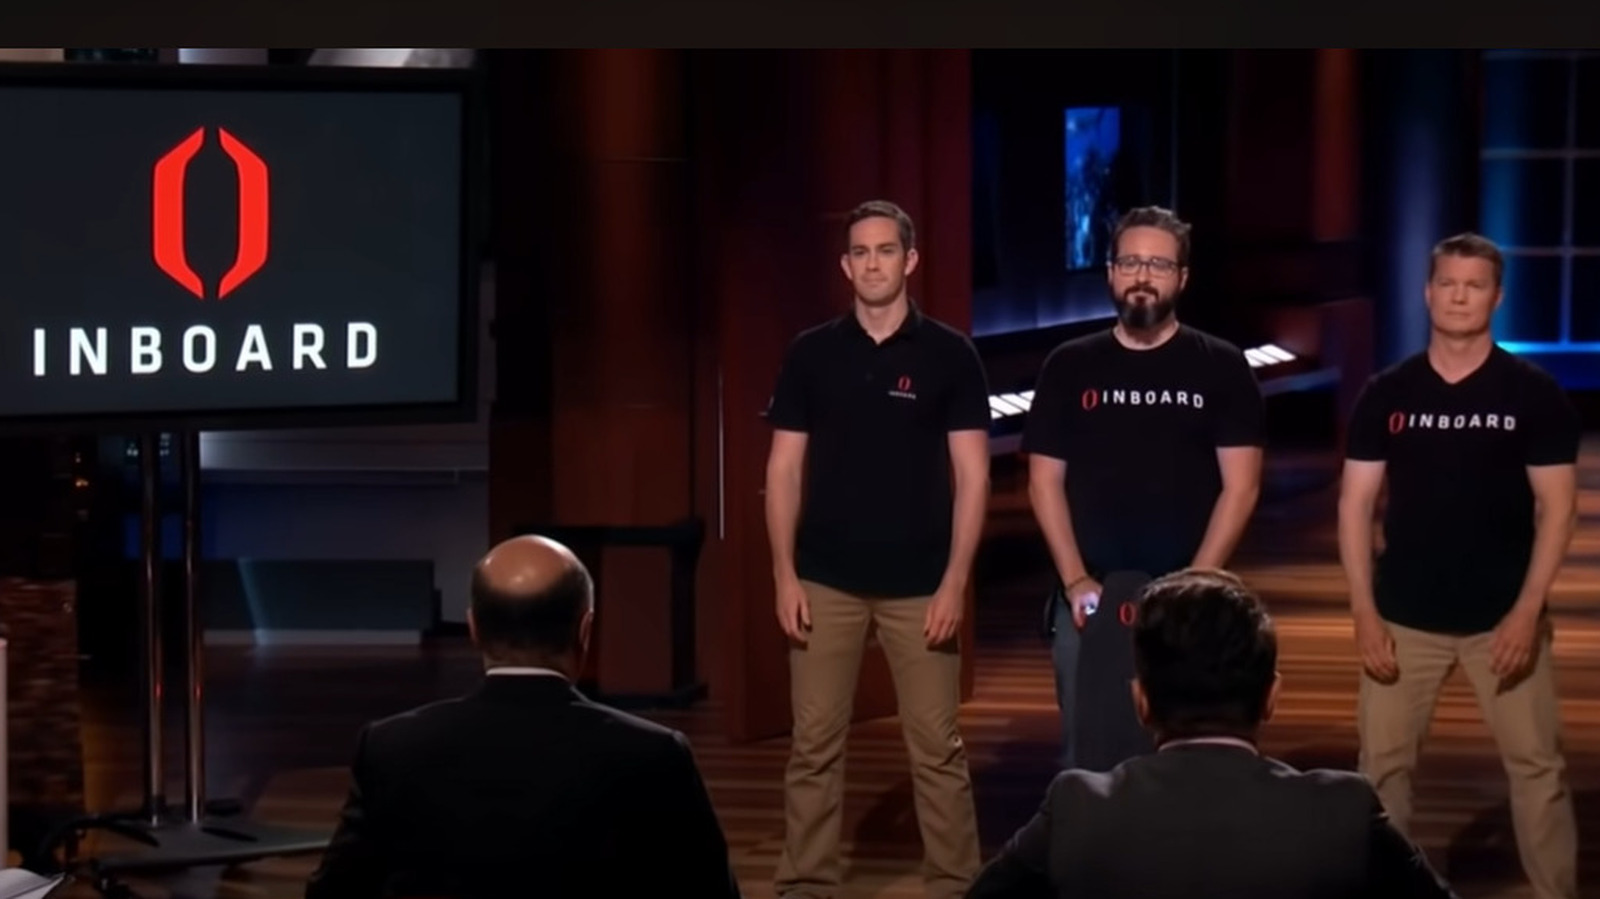 What Happened To The Inboard M1 Electric Skateboard From Shark Tank Season 8?